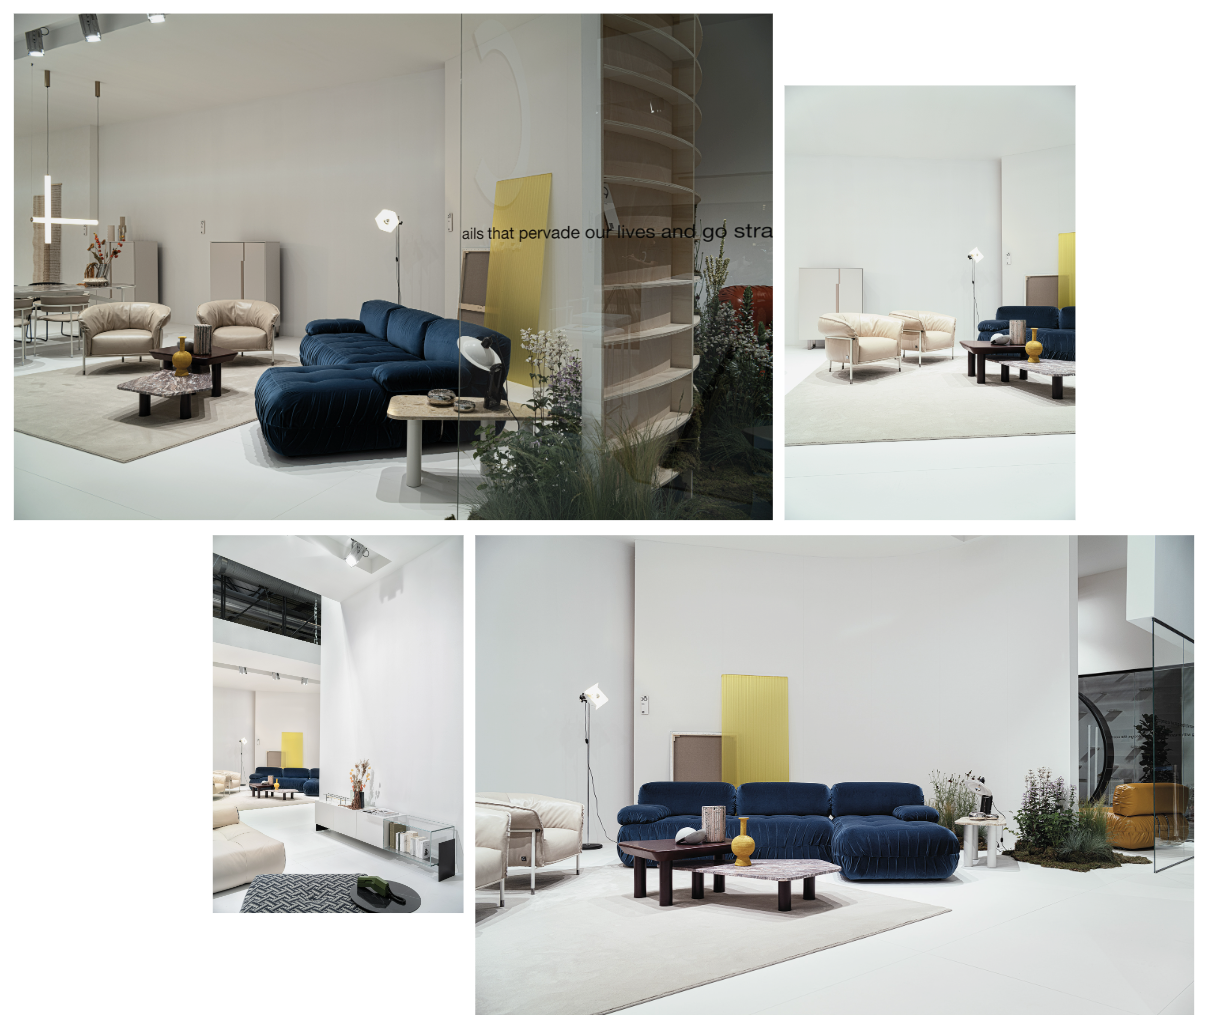 New furniture from Cierre. Made in Italy.